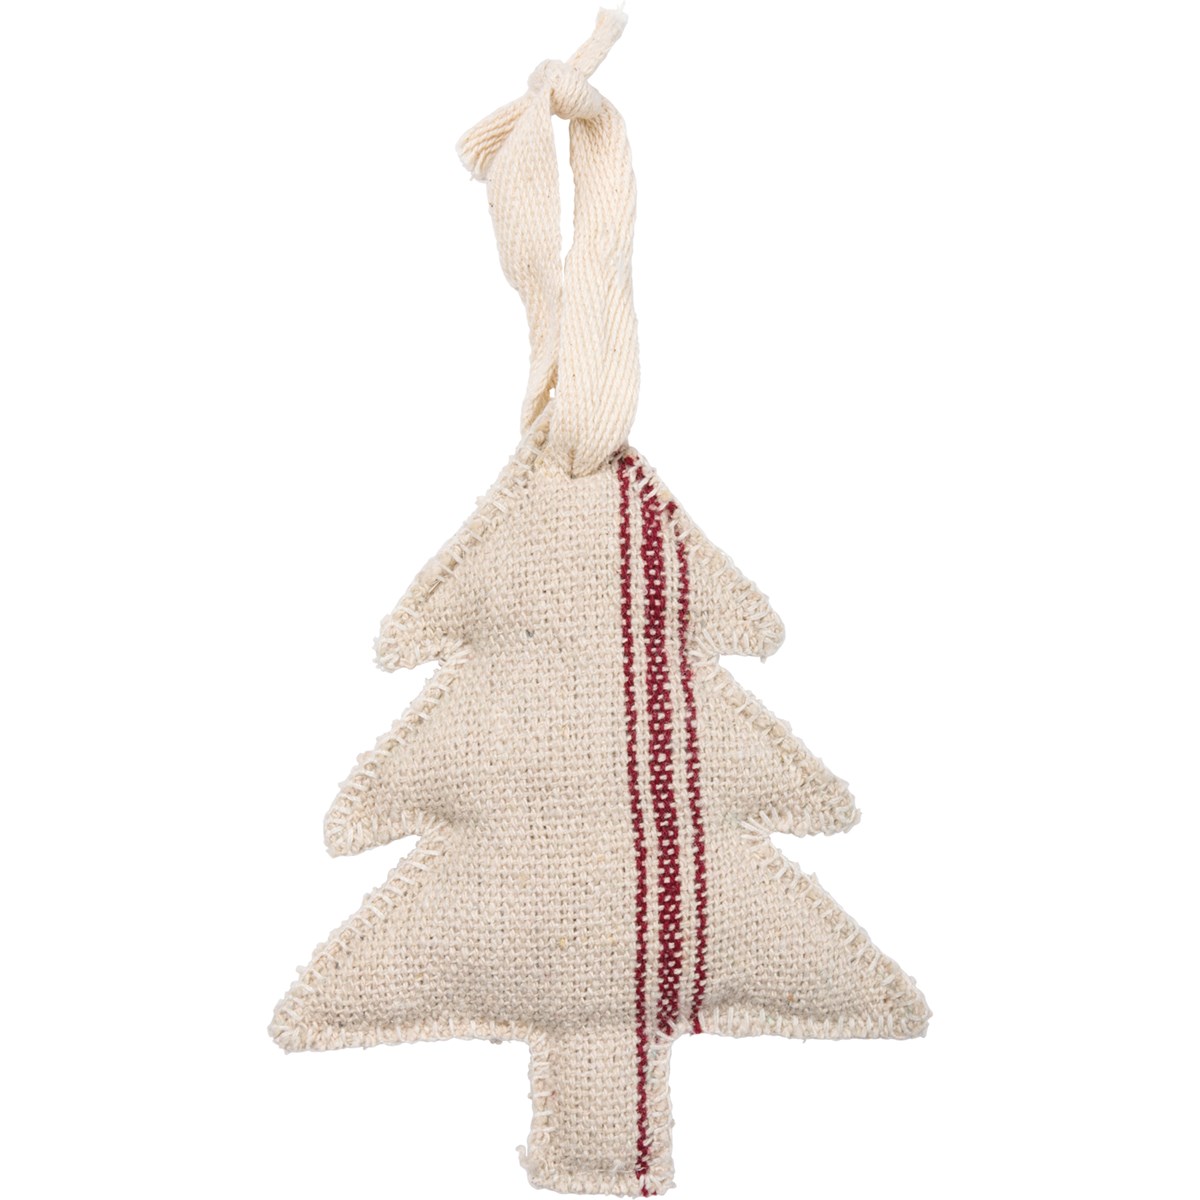 Tree Ornament - Cotton, Polyester